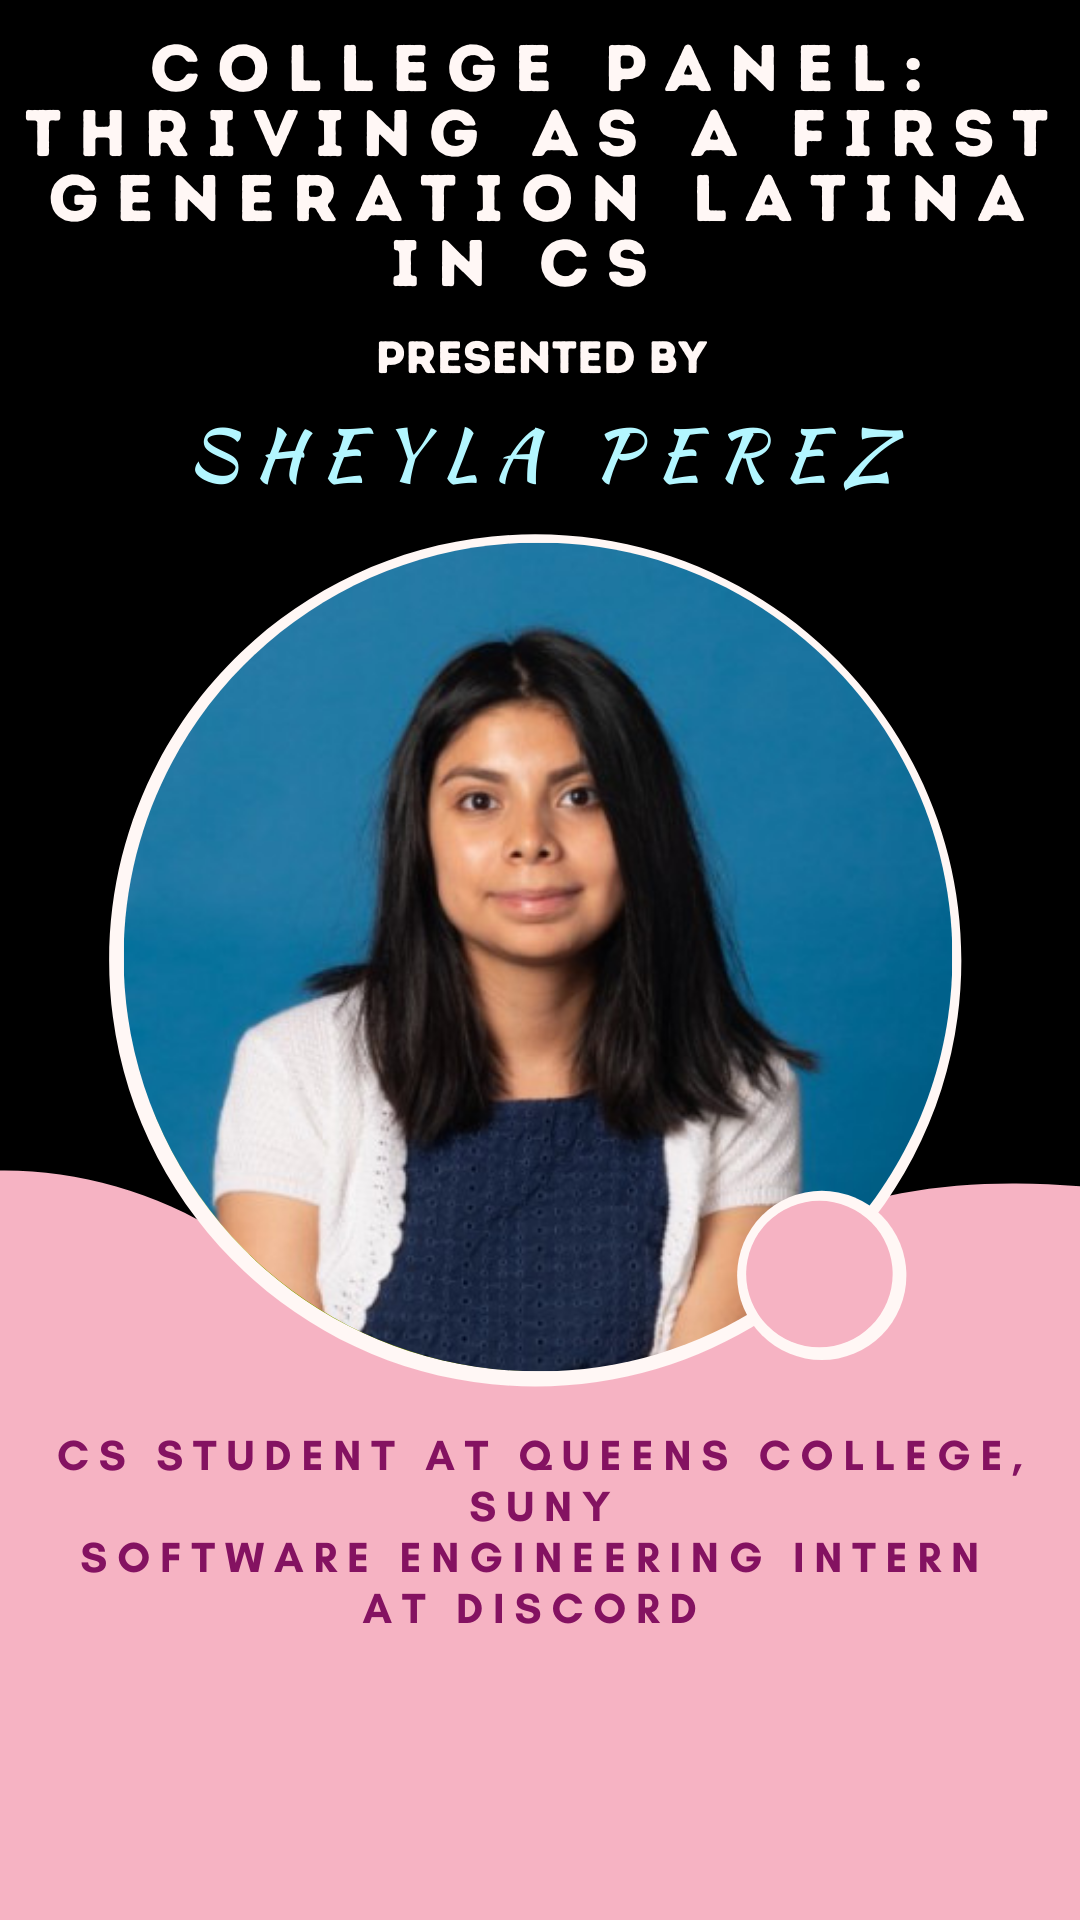 link to her talk "College panel: thriving as a first generation Latina in CS"